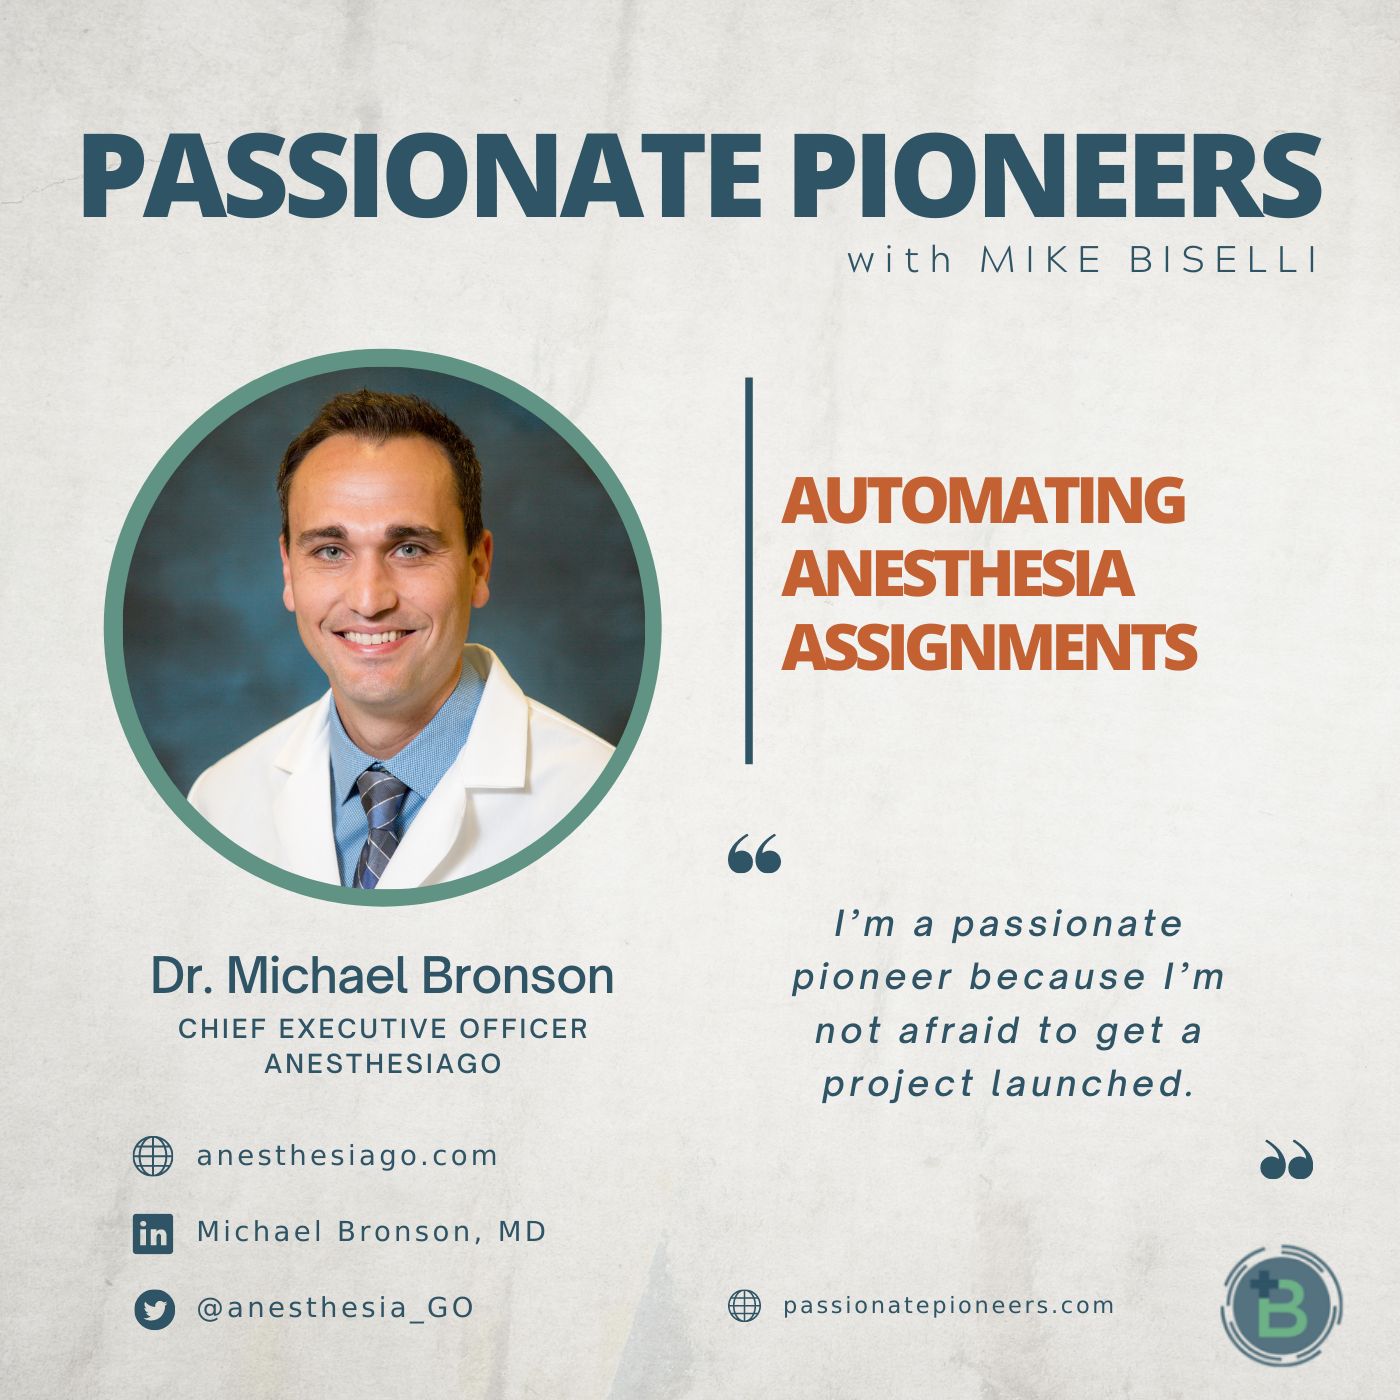 Automating Anesthesia Assignments with Dr. Michael Bronson